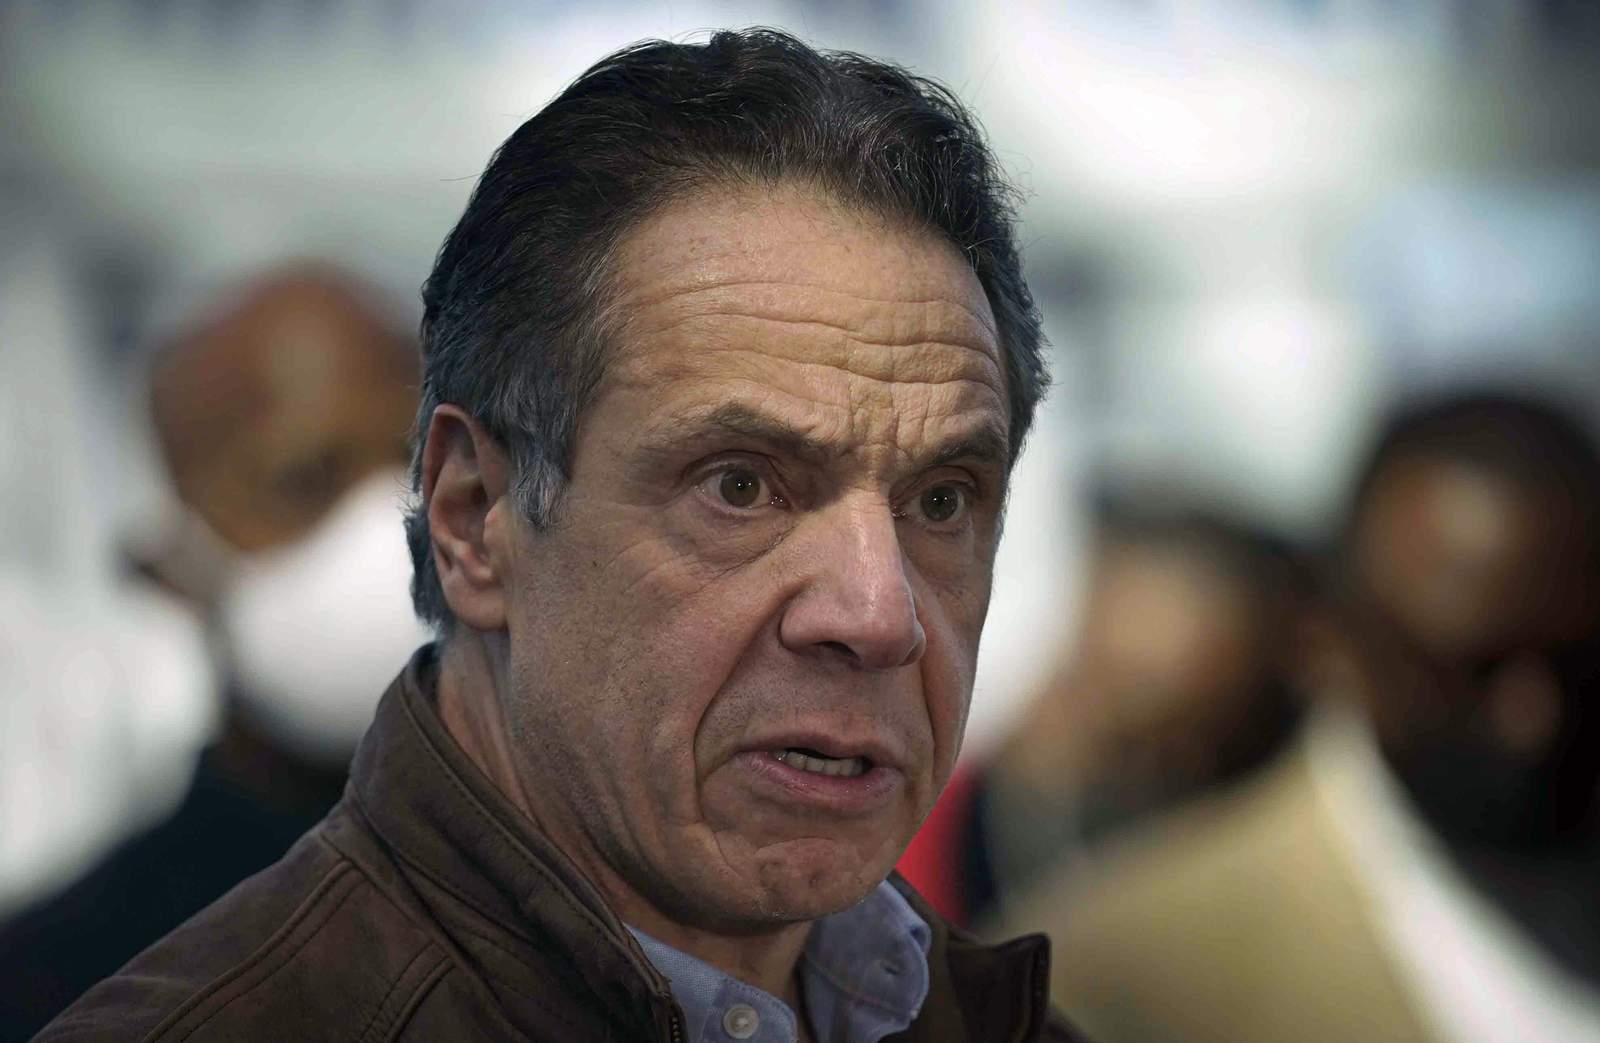 A look at the workplace sex harassment claims against Cuomo